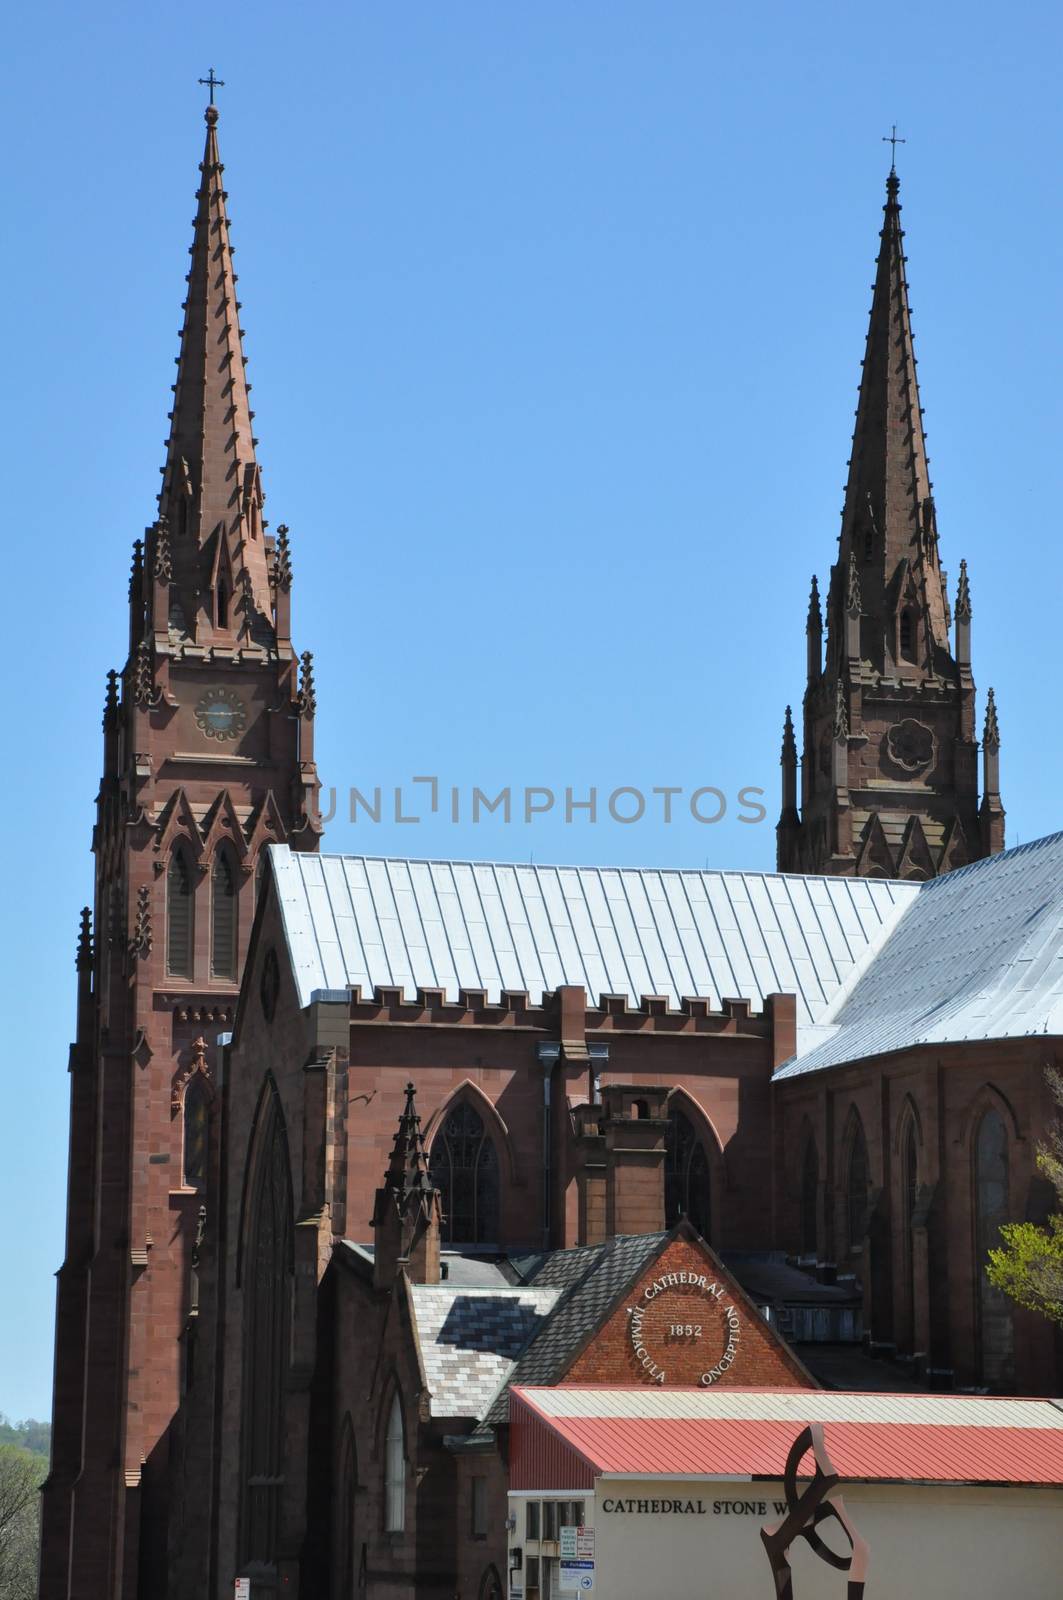 Cathedral of the Immaculate Conception in Albany, New York by sainaniritu